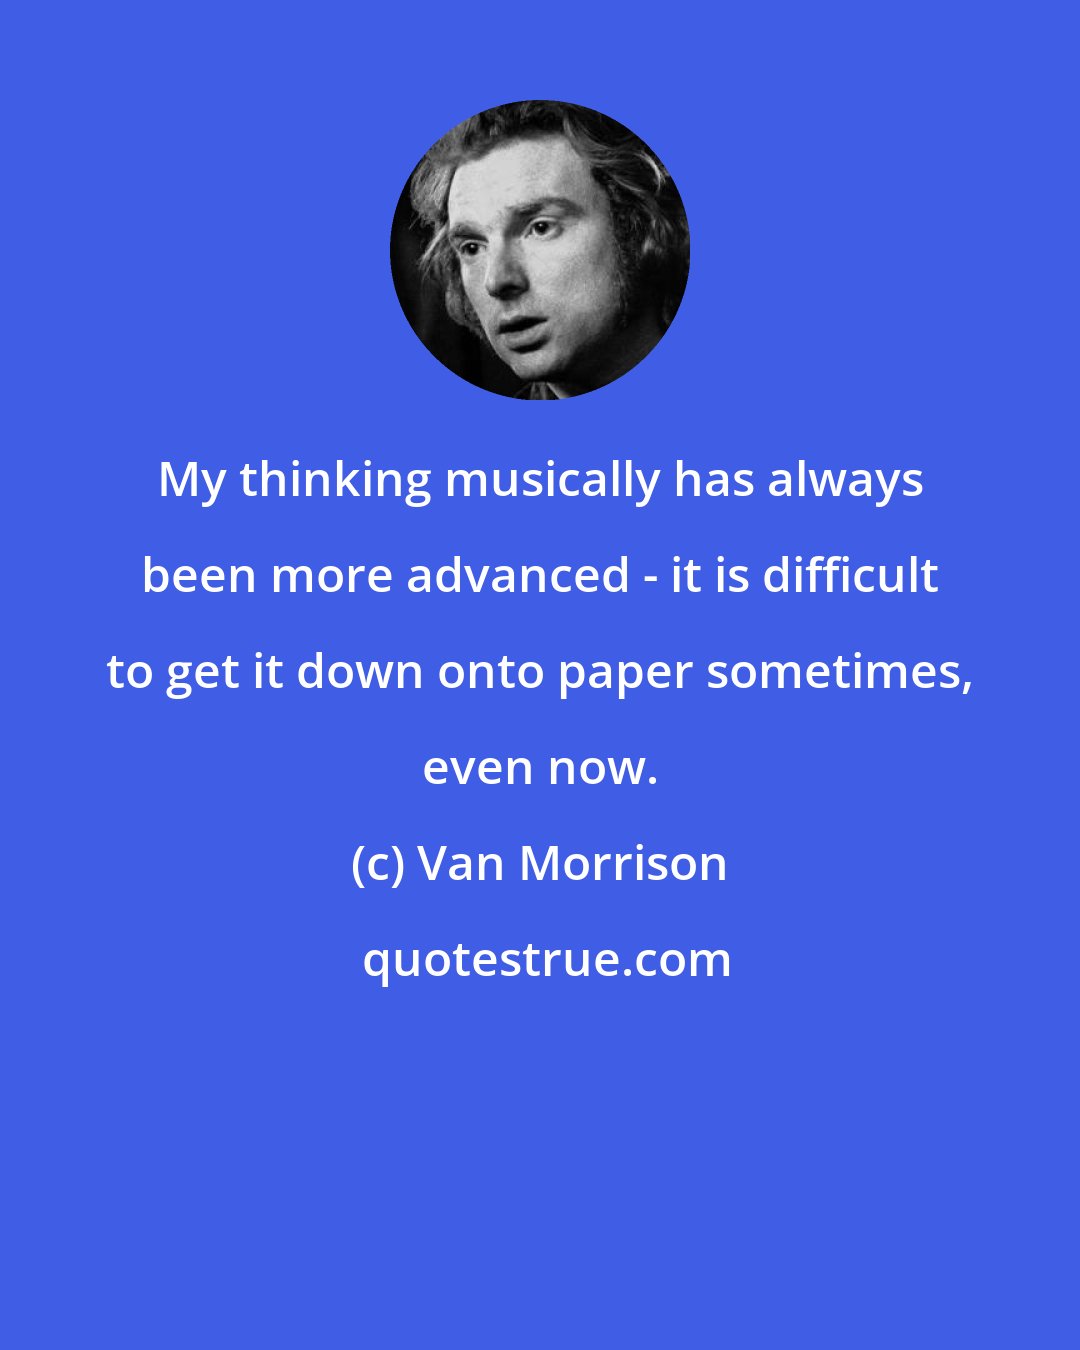 Van Morrison: My thinking musically has always been more advanced - it is difficult to get it down onto paper sometimes, even now.